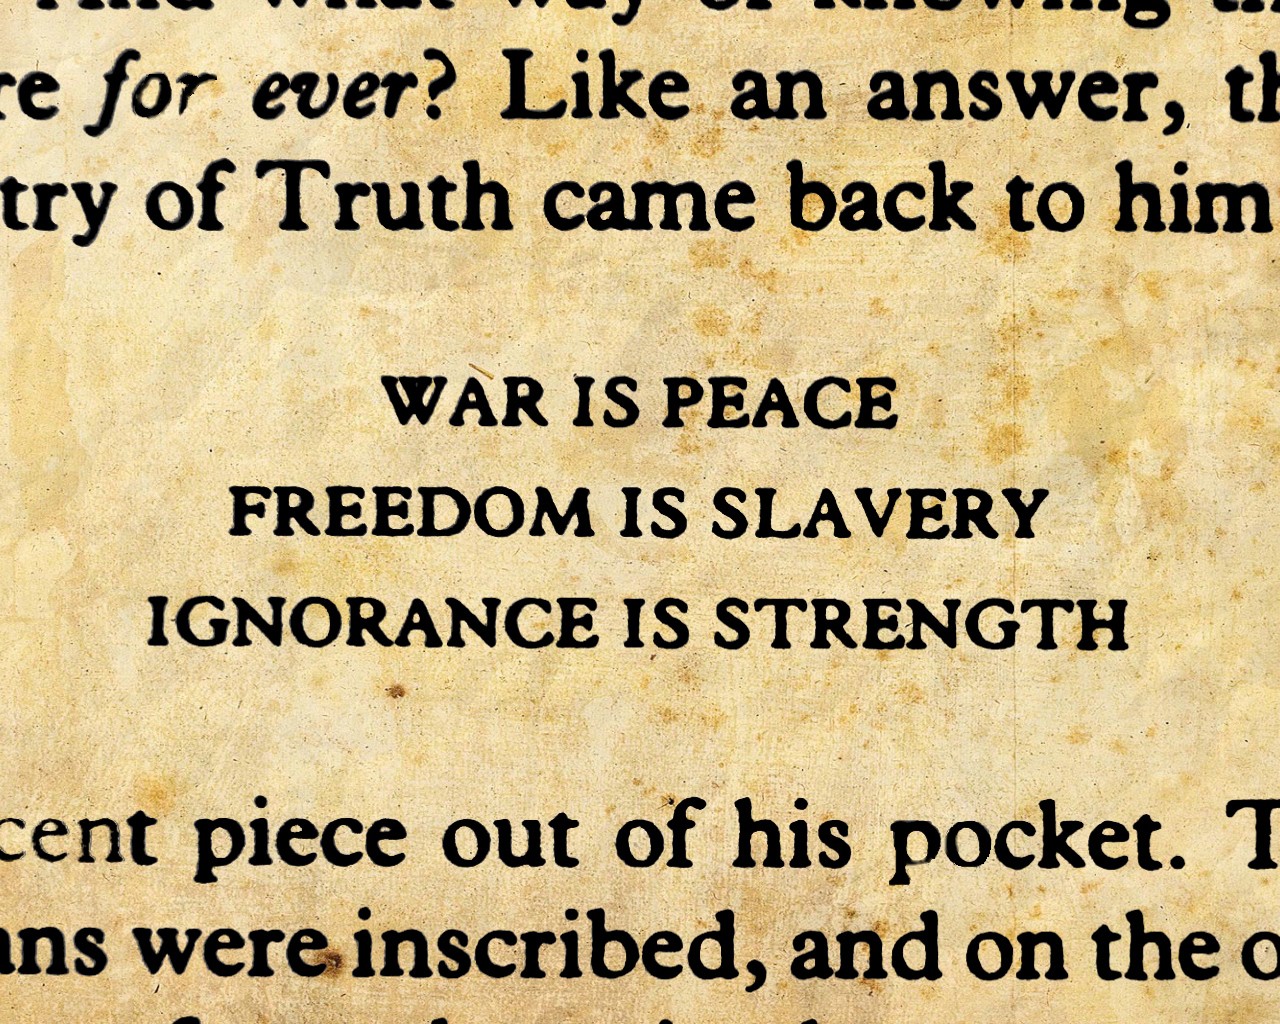 Quote George Orwell 1984 Typography 1984 Literature George Orwell 1280x1024